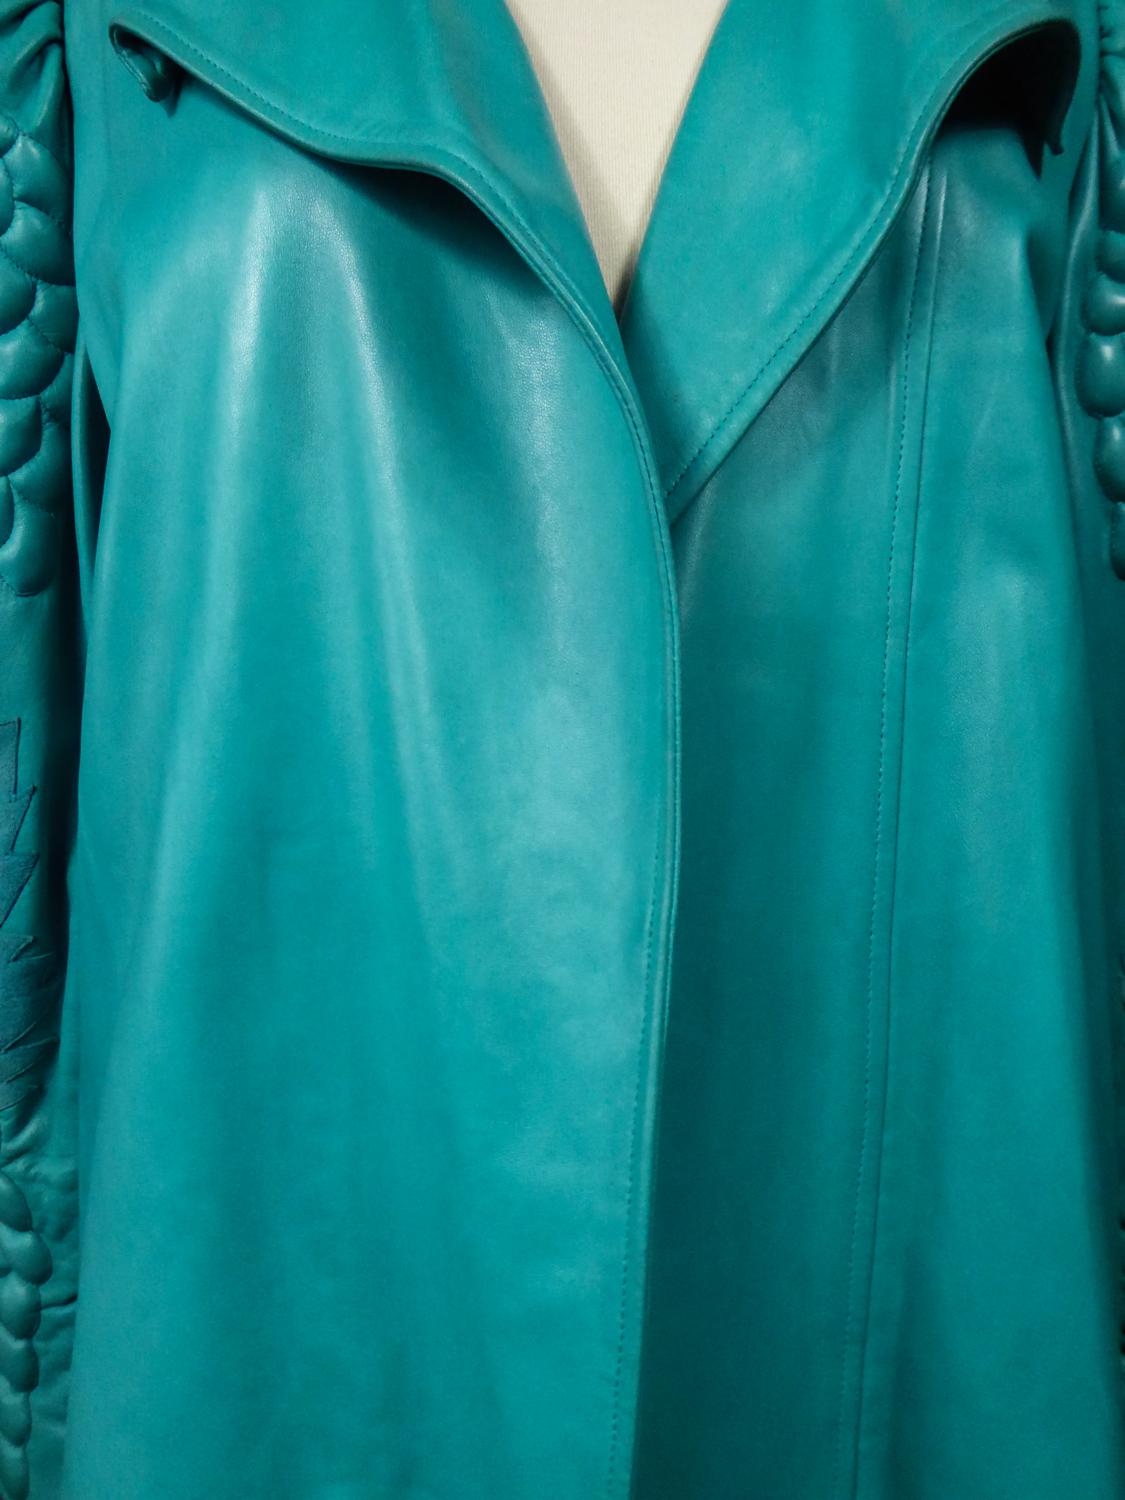 Women's A Jean-Claude Jitrois Skirt and Jacket in Turquoise Leather - Fall 1985/1986  For Sale